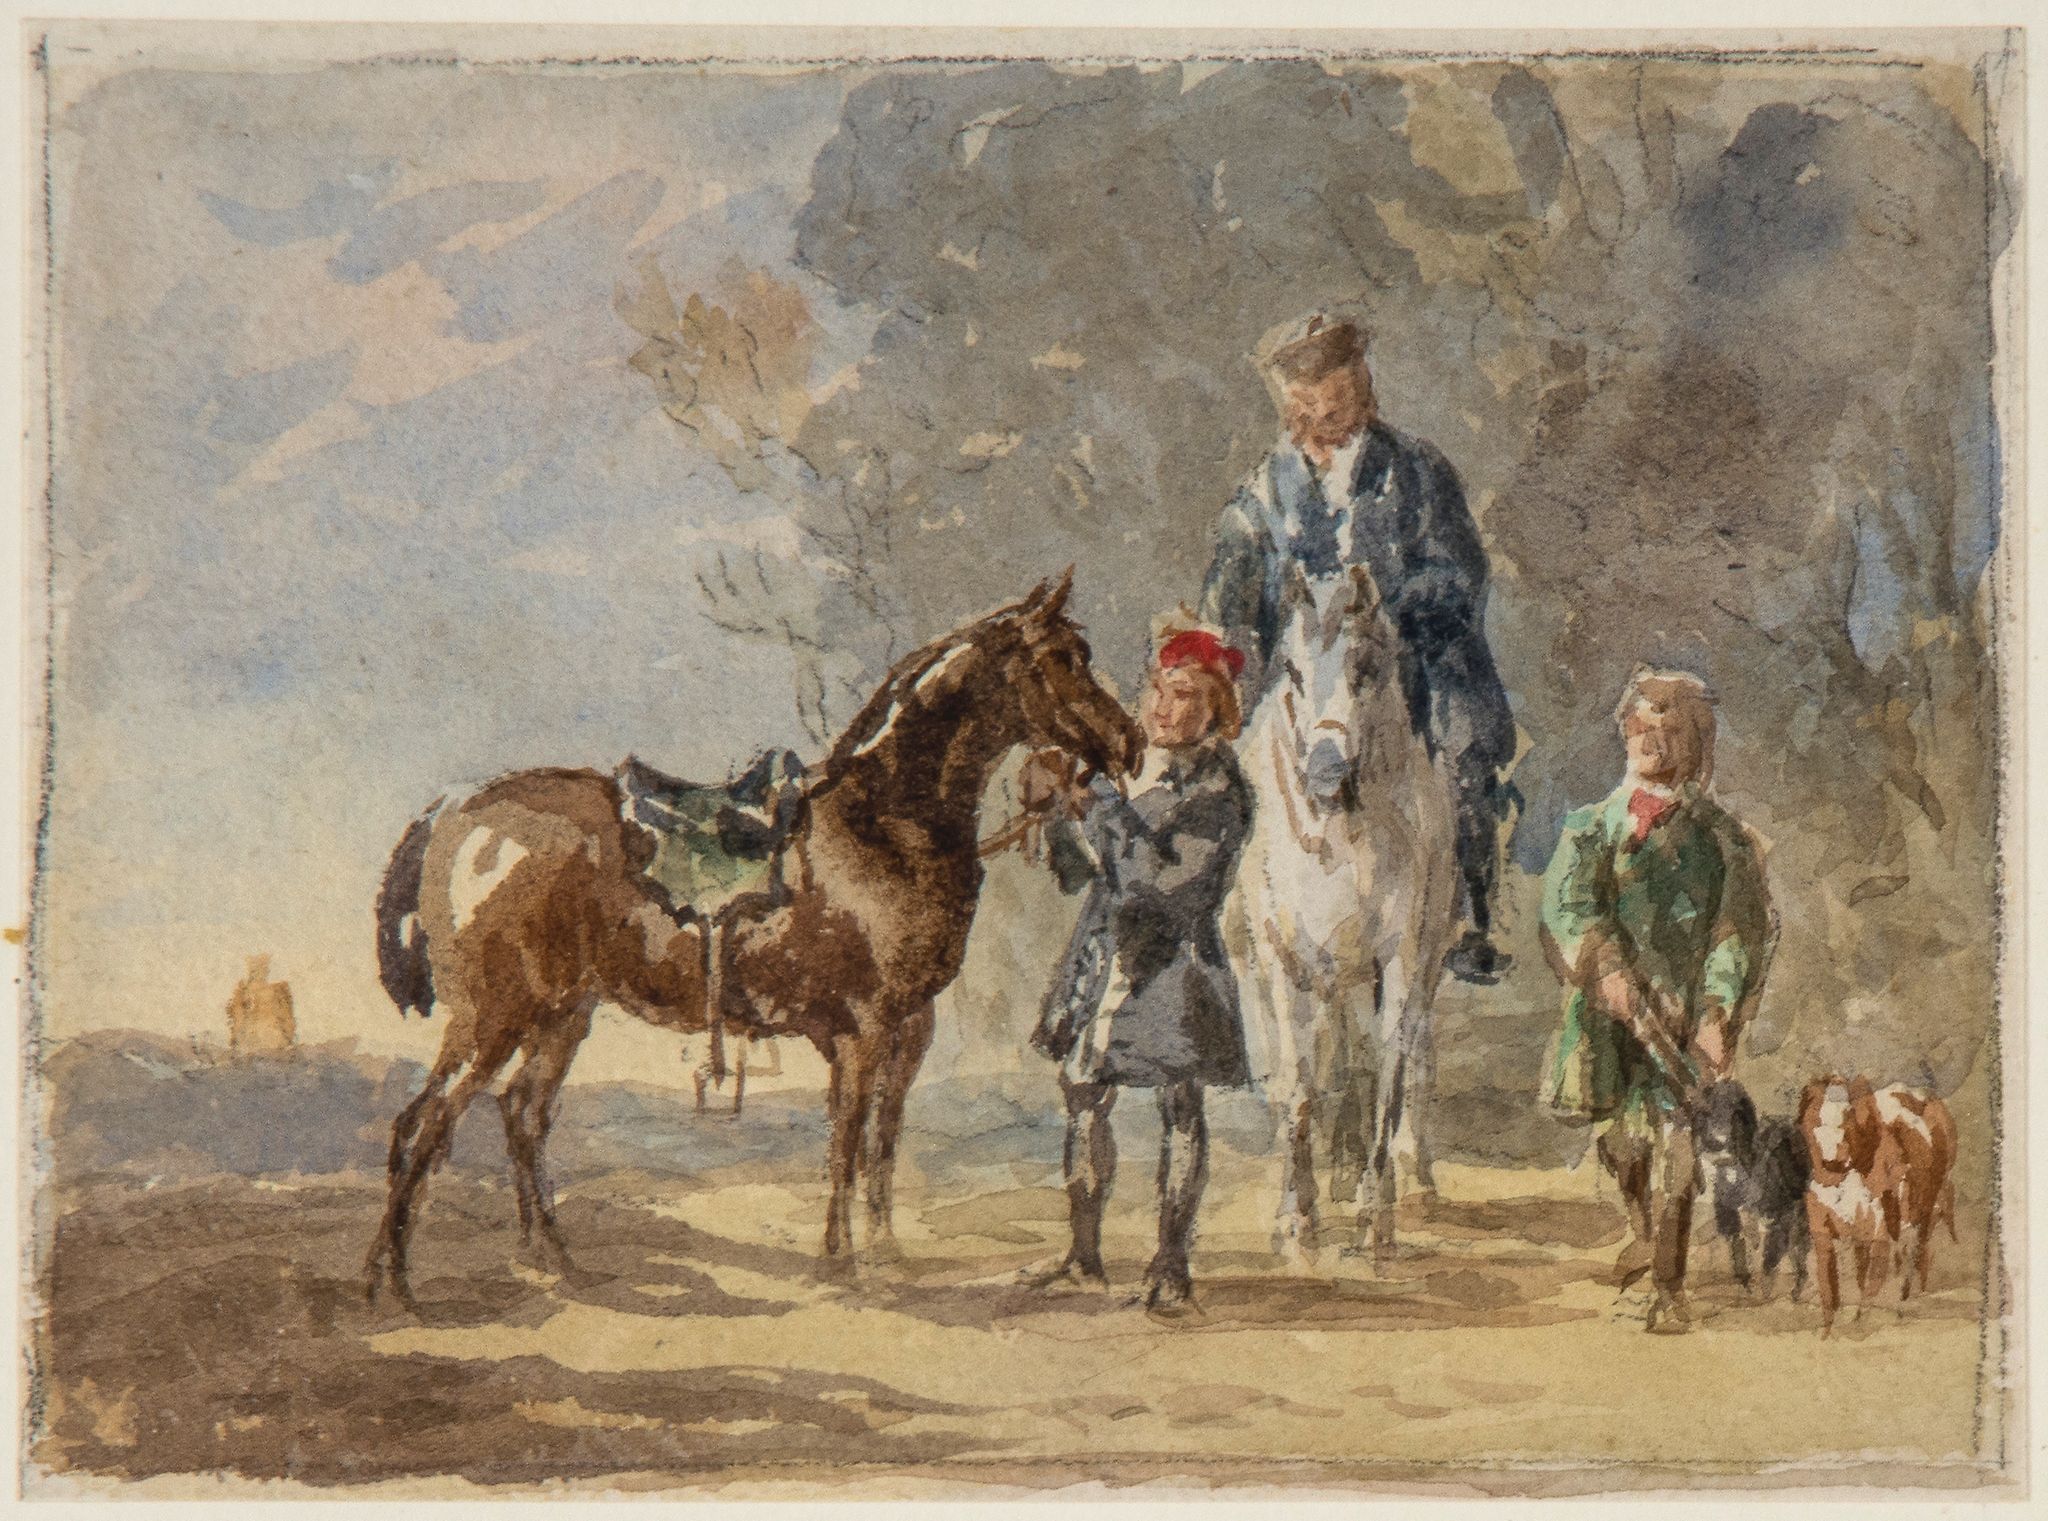 John Frederick Tayler PRWS (1802-1889) - A Scottish hunting party Watercolour over pencil 10 x